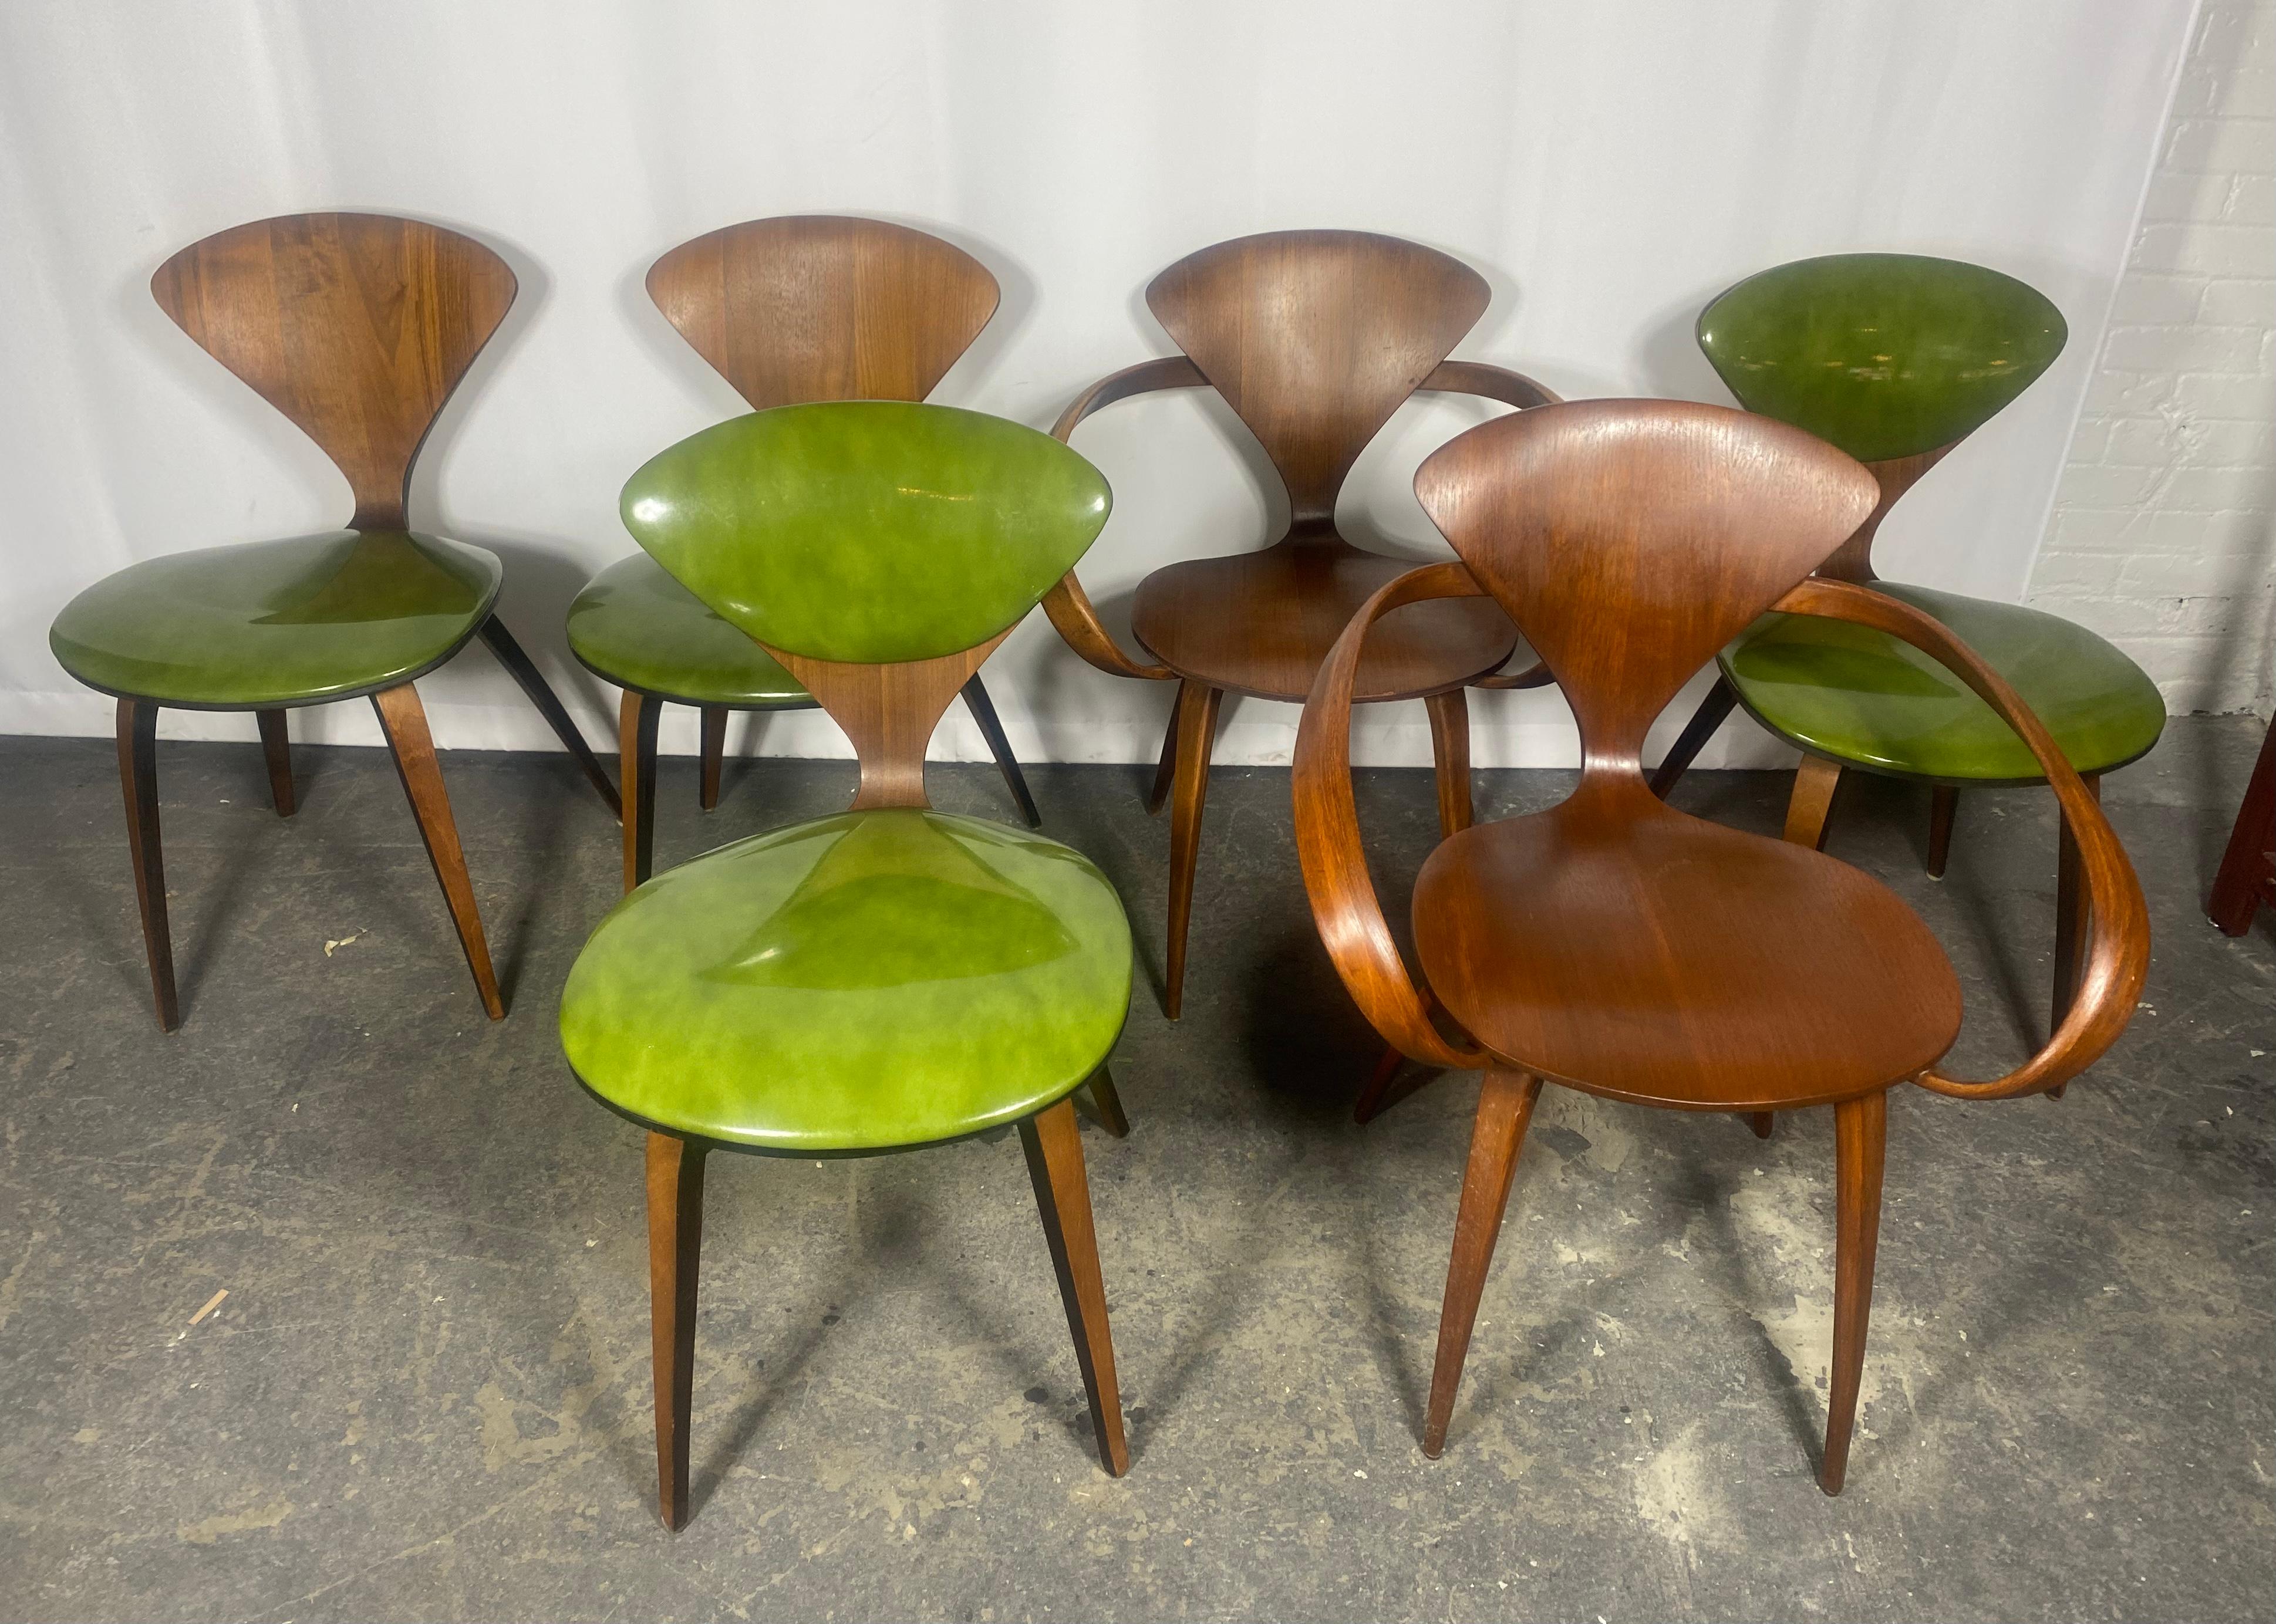 Mid-20th Century Set of 6 Norman Cherner Dining Chairs, Made by Plycraft, USA, 1963. 2 Arm Chairs For Sale